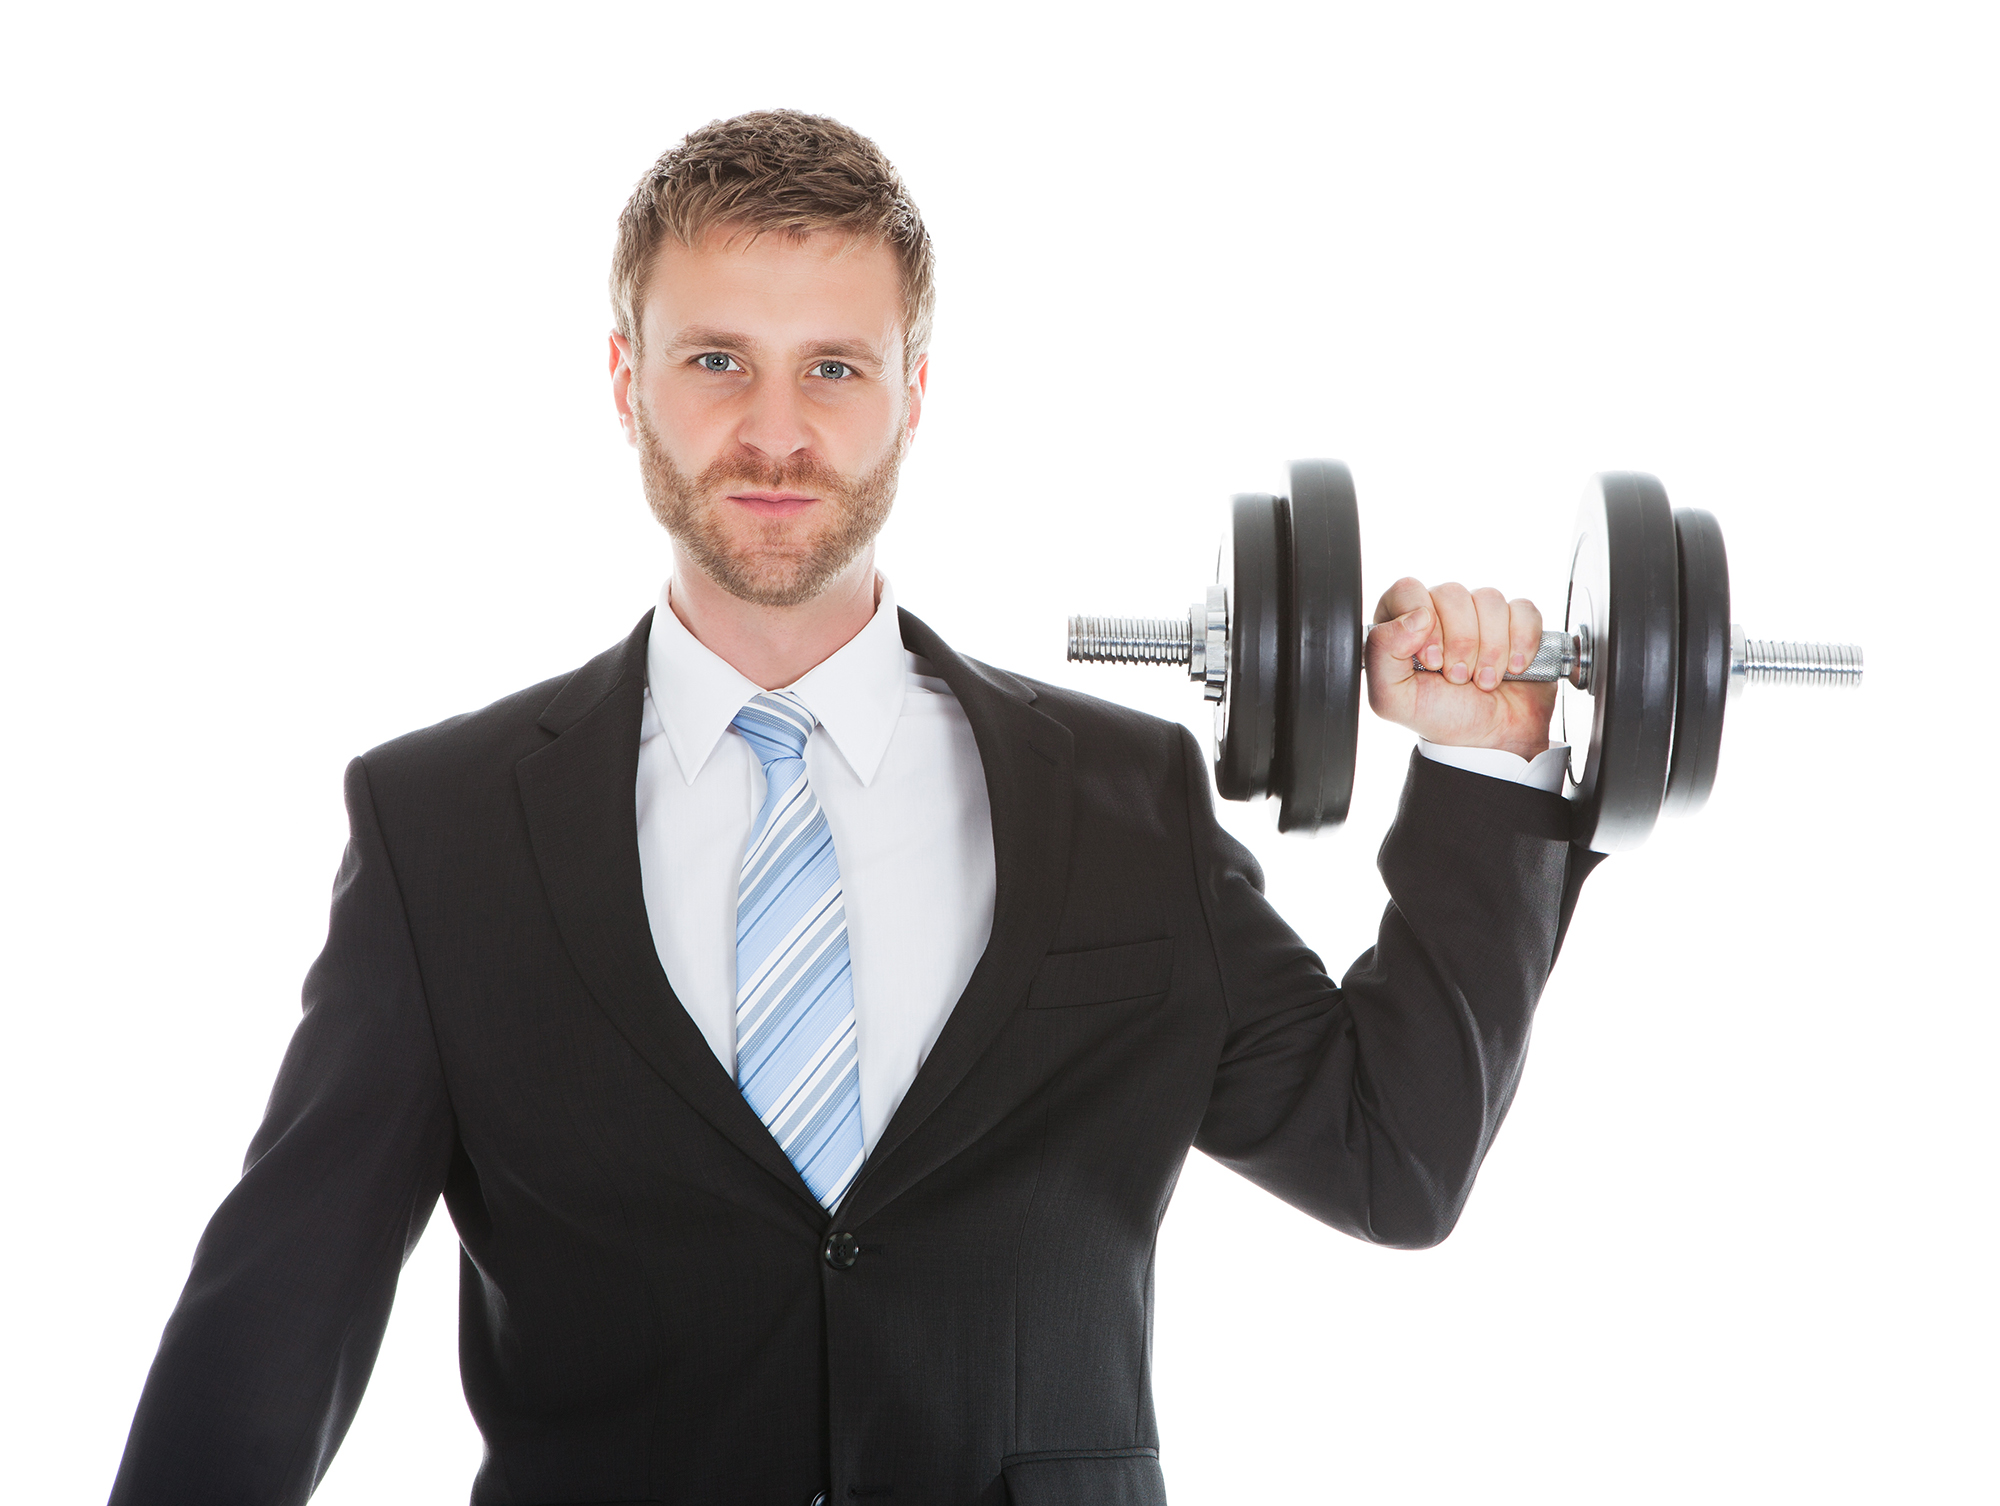 Business man lifting weights